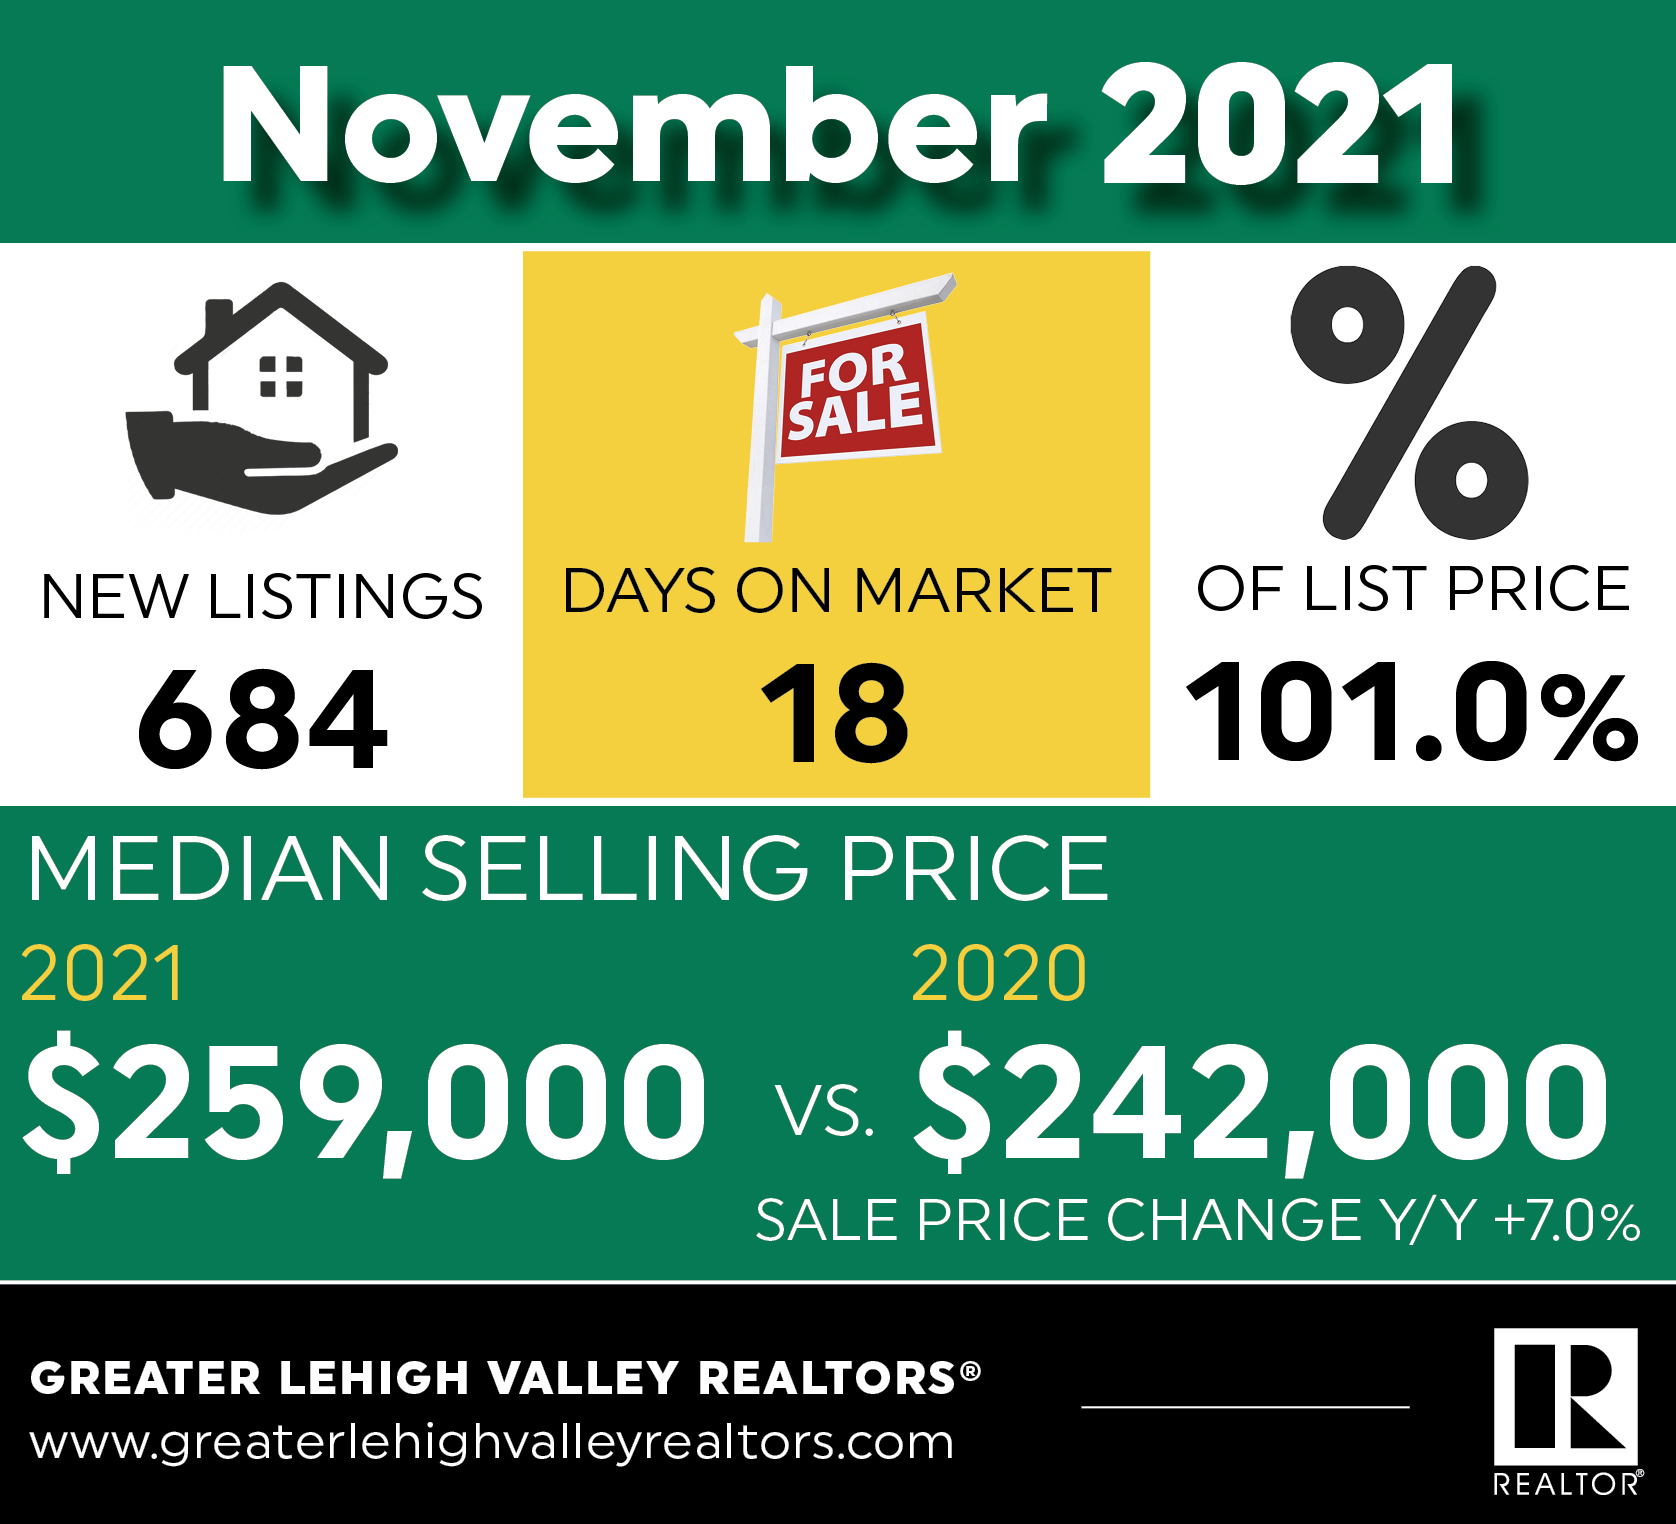 Stymied Only by Inventory, November Sees Solid, Busy Real Estate Market